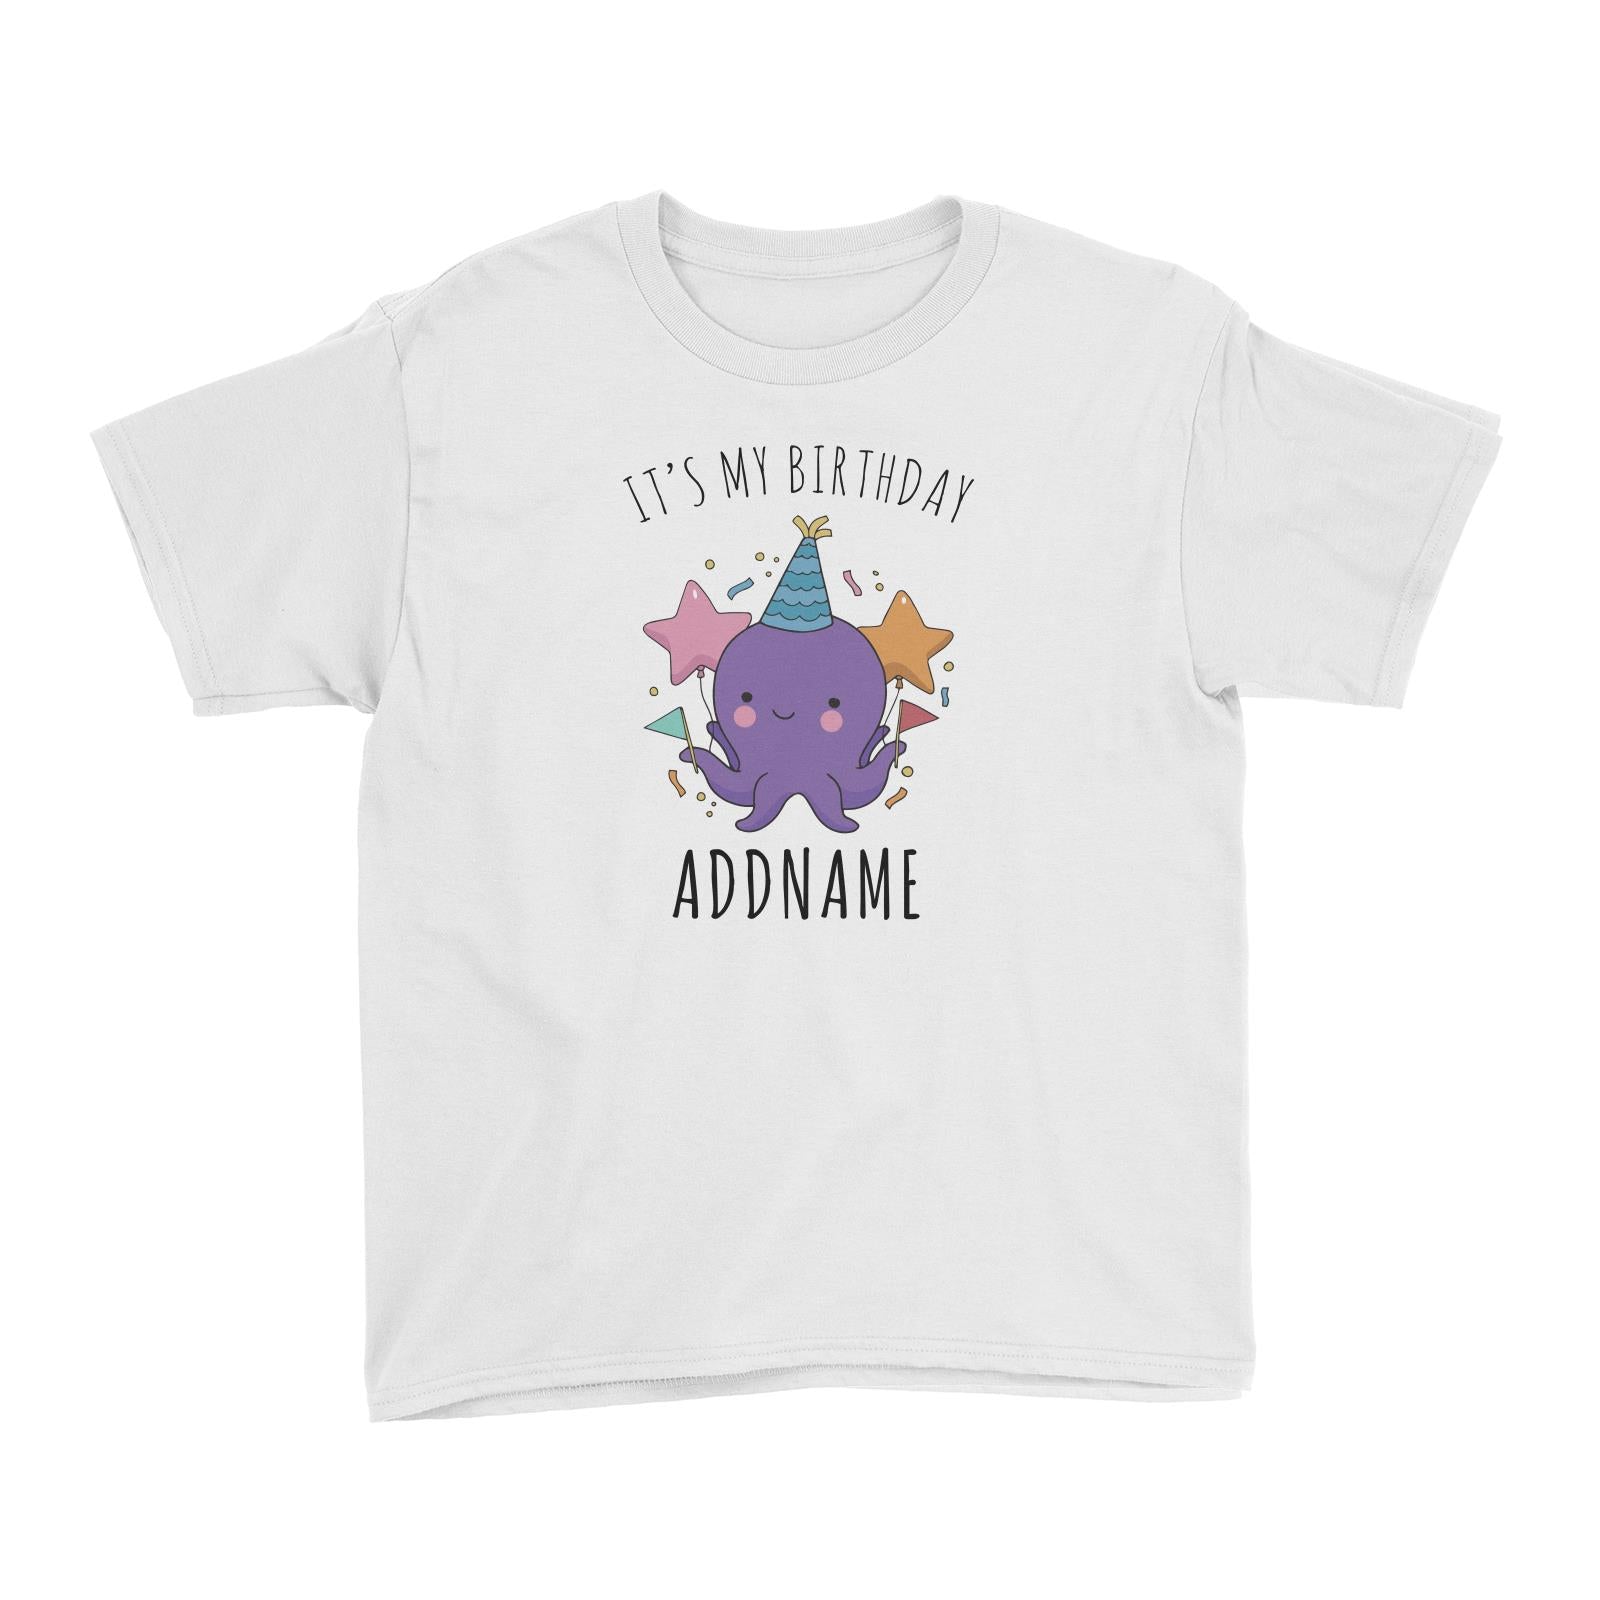 Birthday Sketch Animals Octopus with Flags It's My Birthday Addname Kid's T-Shirt